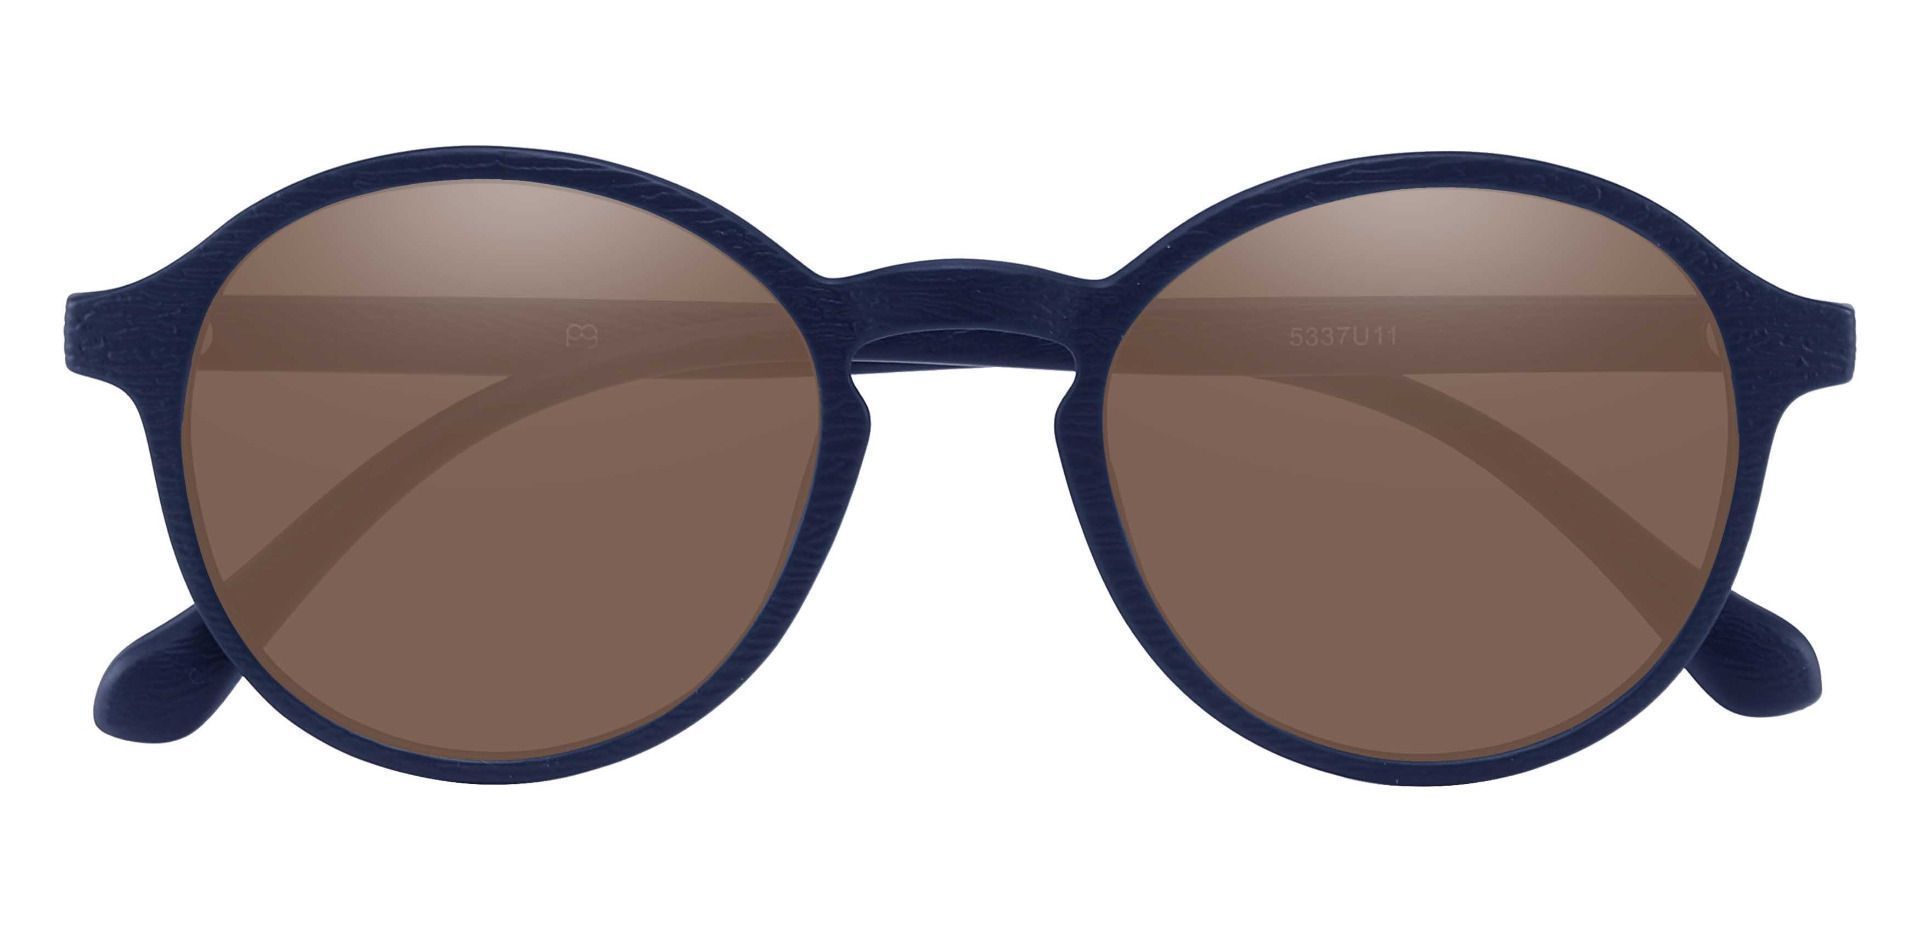 Whitney Round Non-Rx Sunglasses - Blue Frame With Brown Lenses